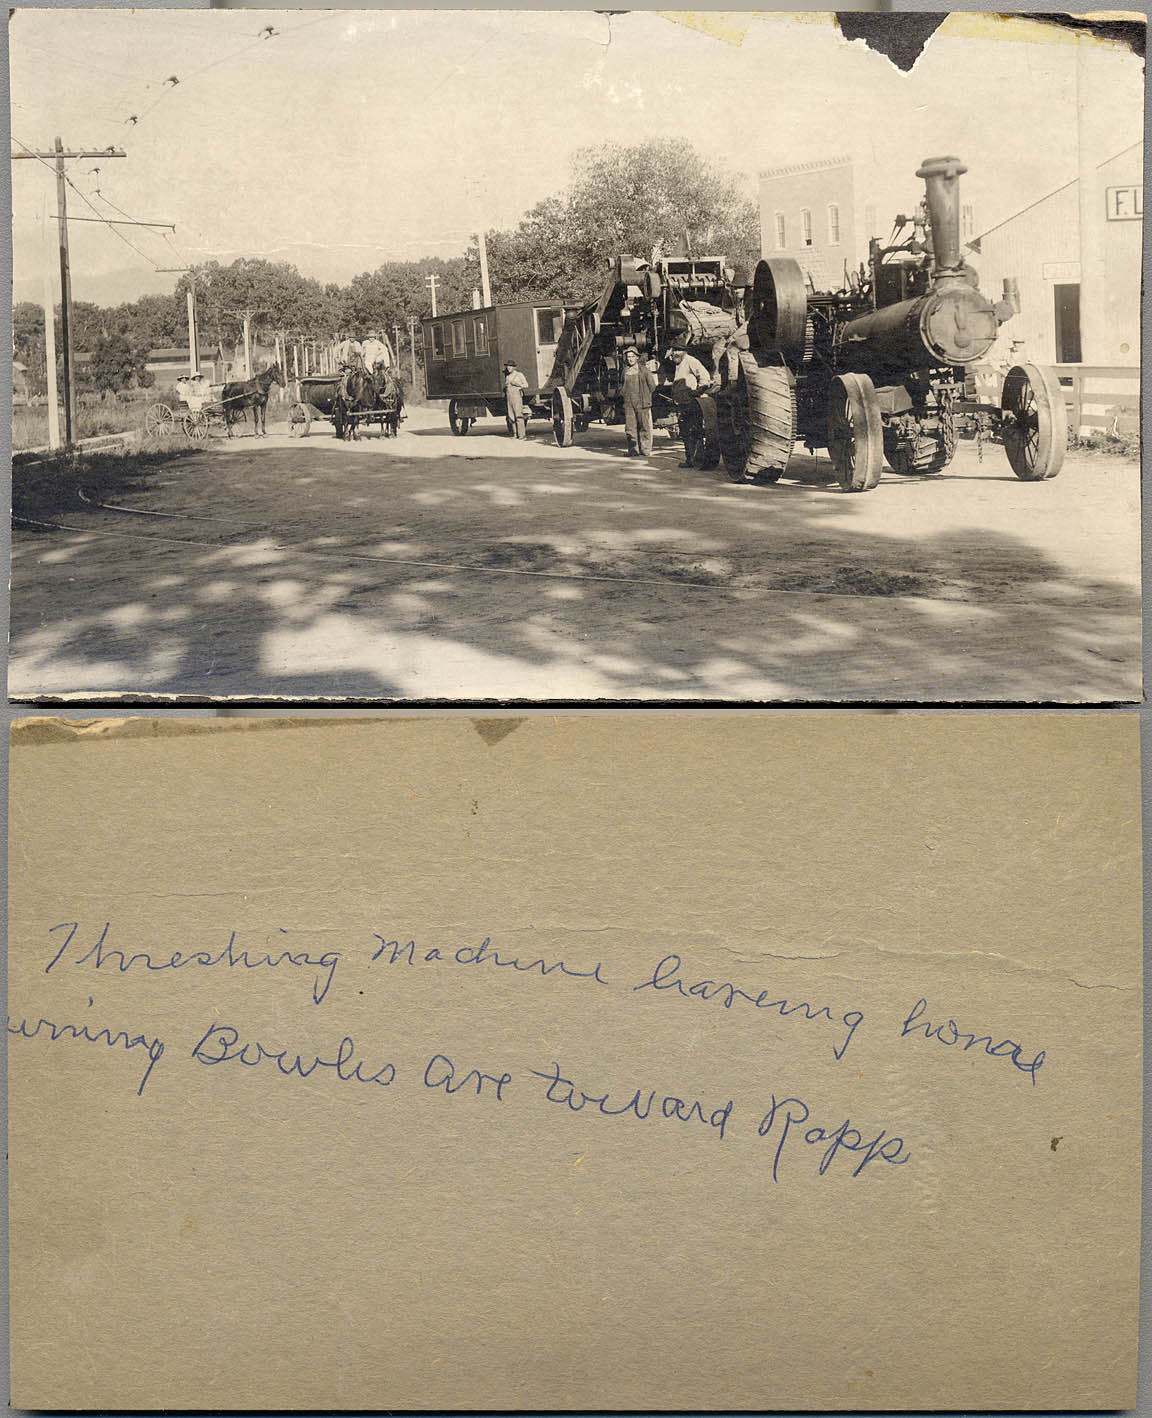 Around 1914, a wagon train with a threshing machine pulled by a Case 60 steam tractor followed by a water trailer, and horse and buggy with two ladies and their large hats, according to the caption, nears Bowles Avenue and Rapp in Littleton, Colorado.